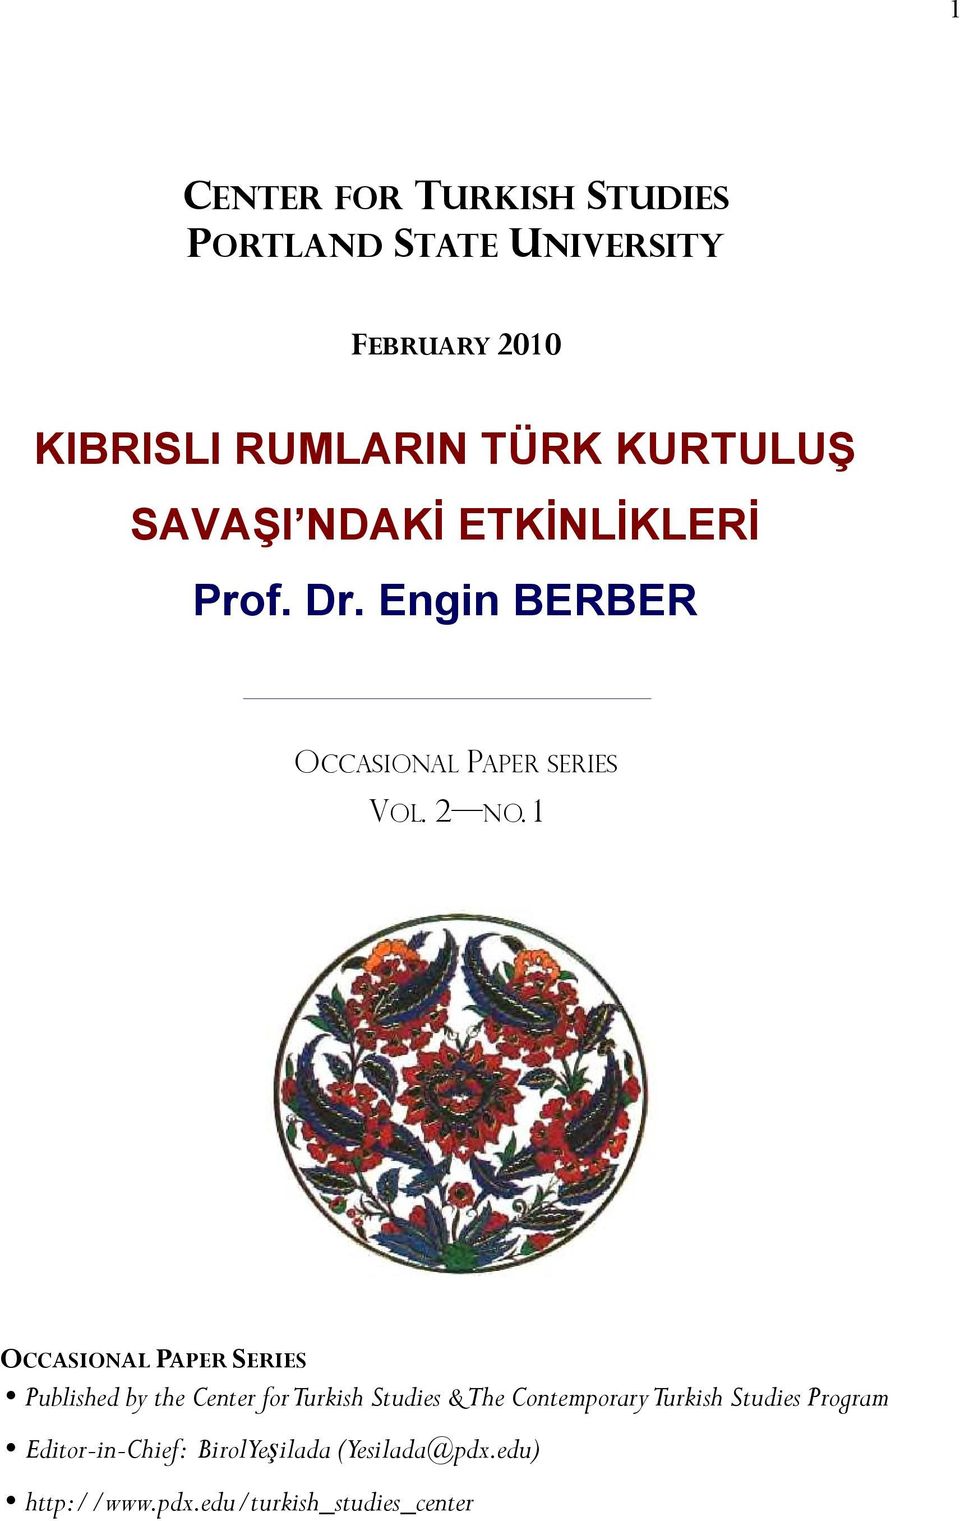 1 OCCASIONAL PAPER SERIES Published by the Center for Turkish Studies & The Contemporary Turkish